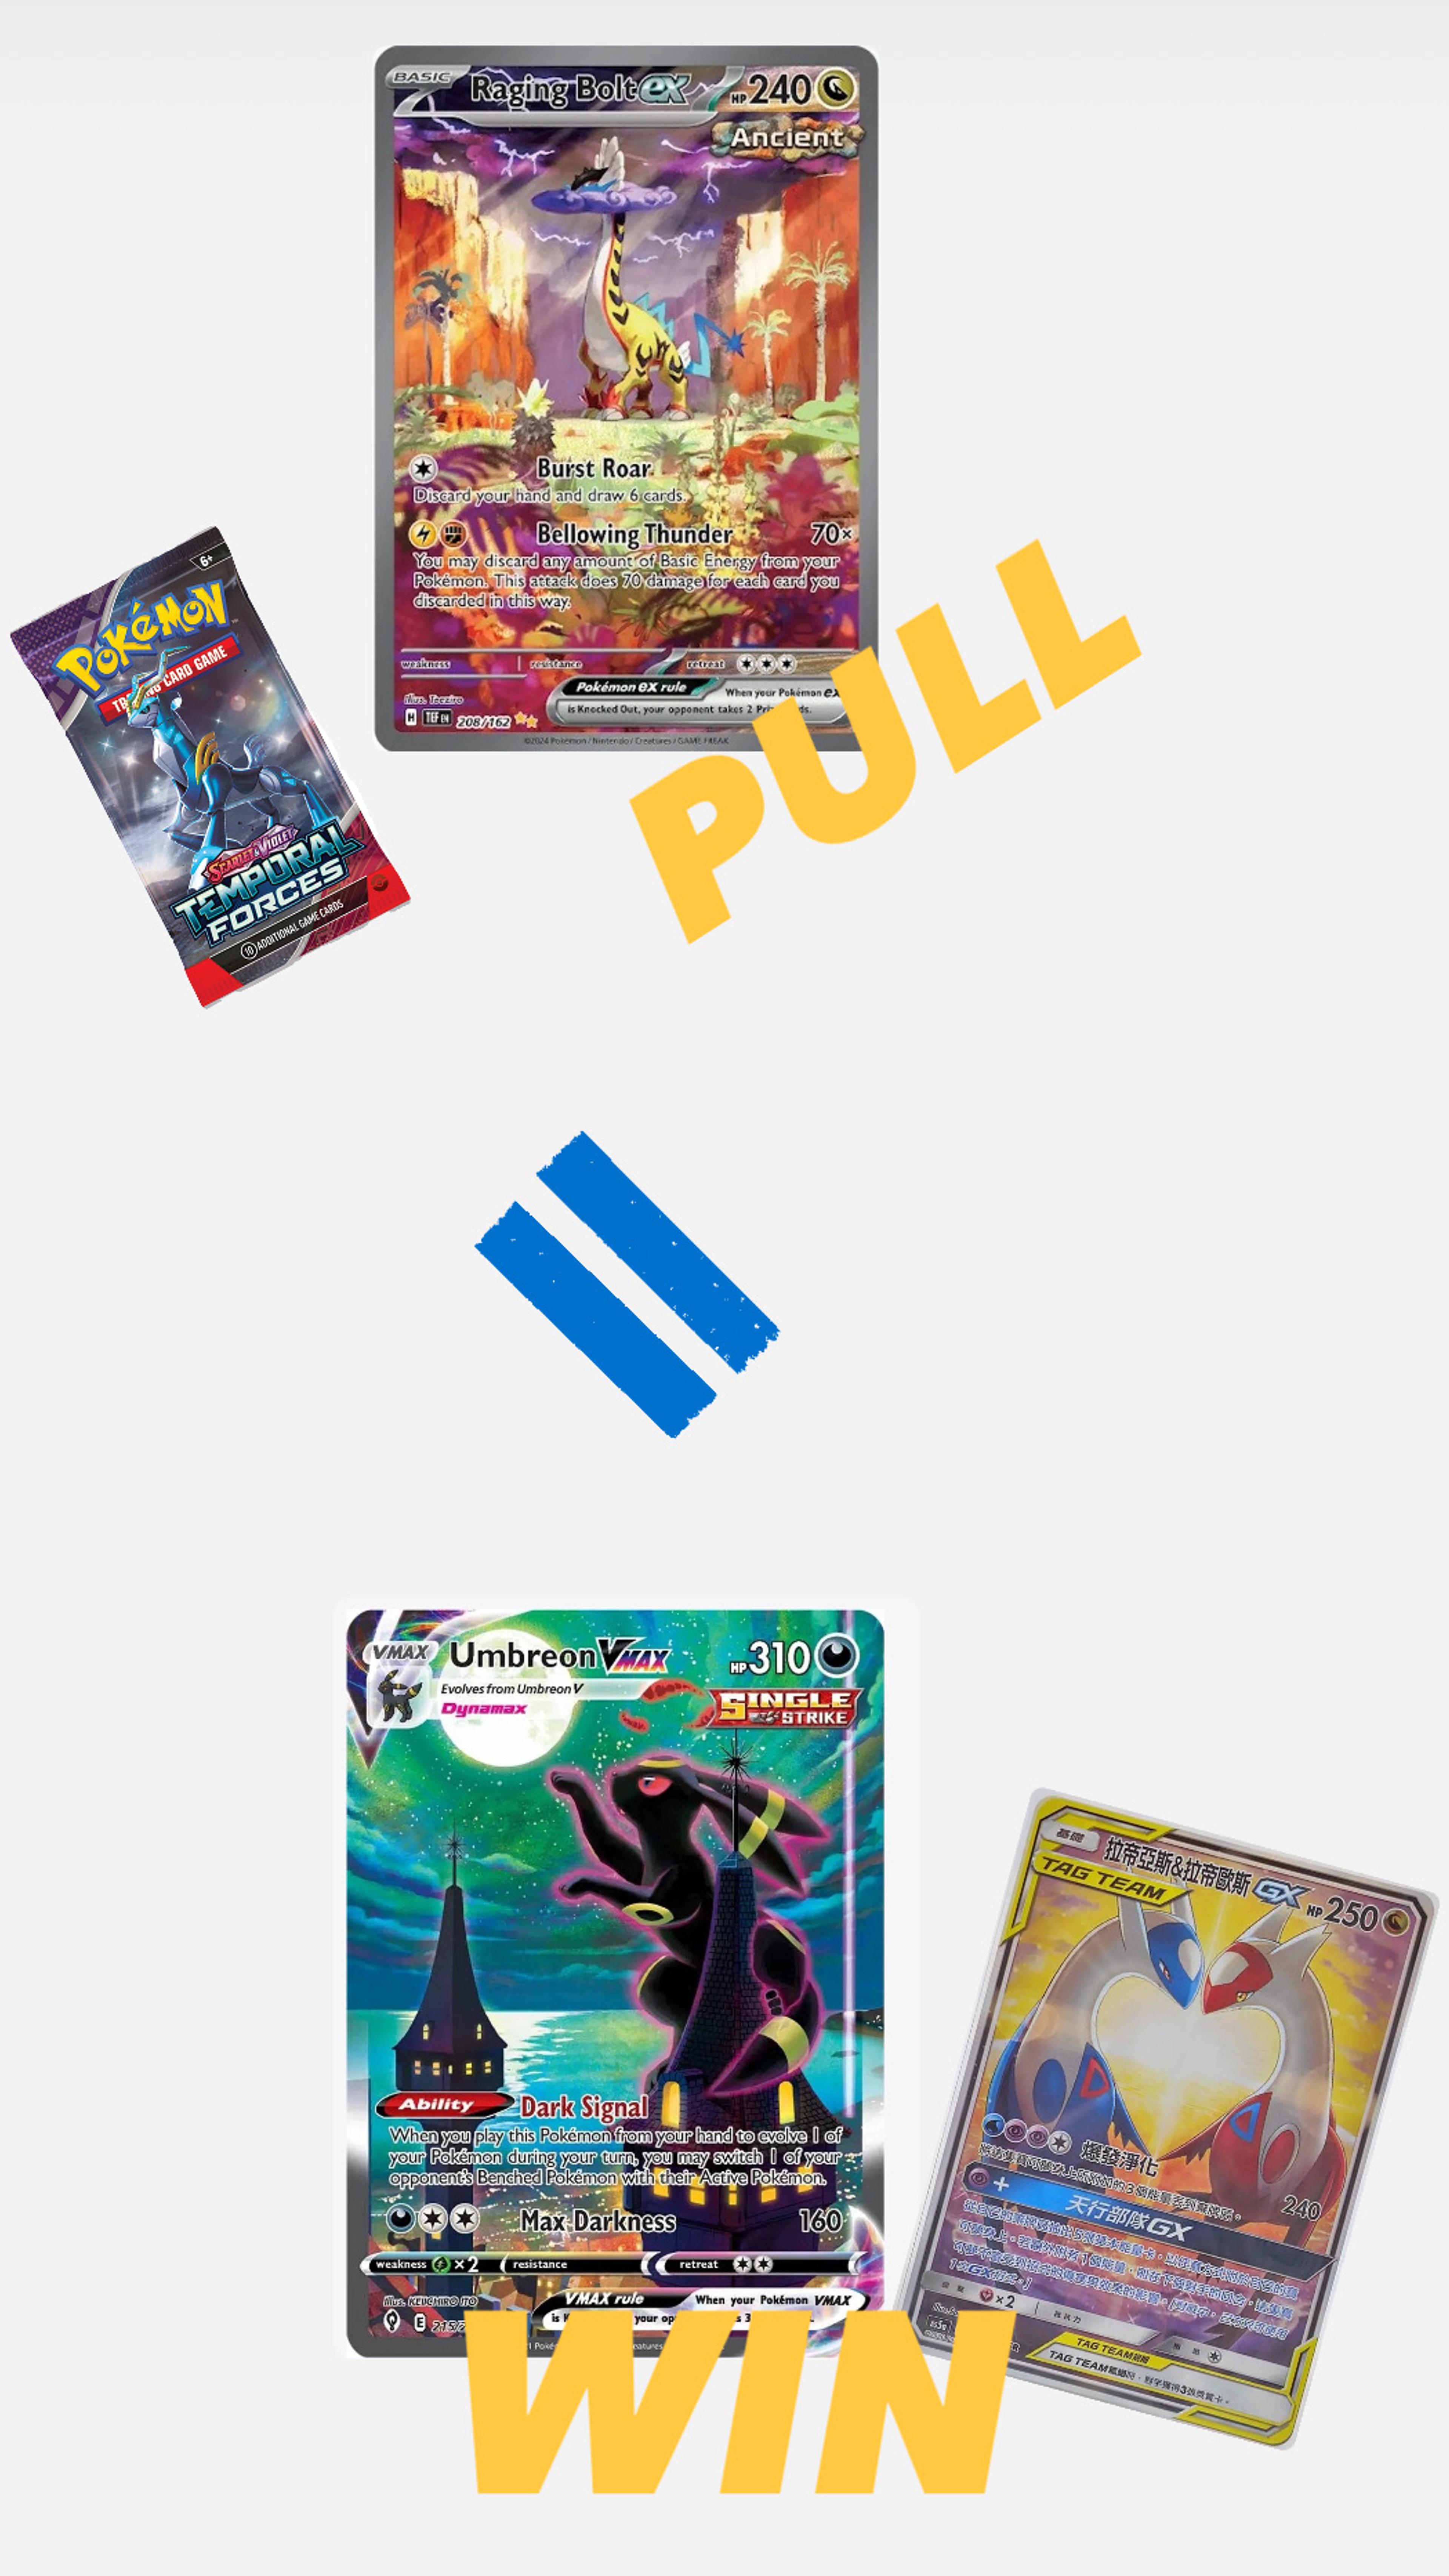 Preview image for the show titled "Craftii: WIN UMBREON VMAX ALT! TCG & MORE!" at May 4, 2024